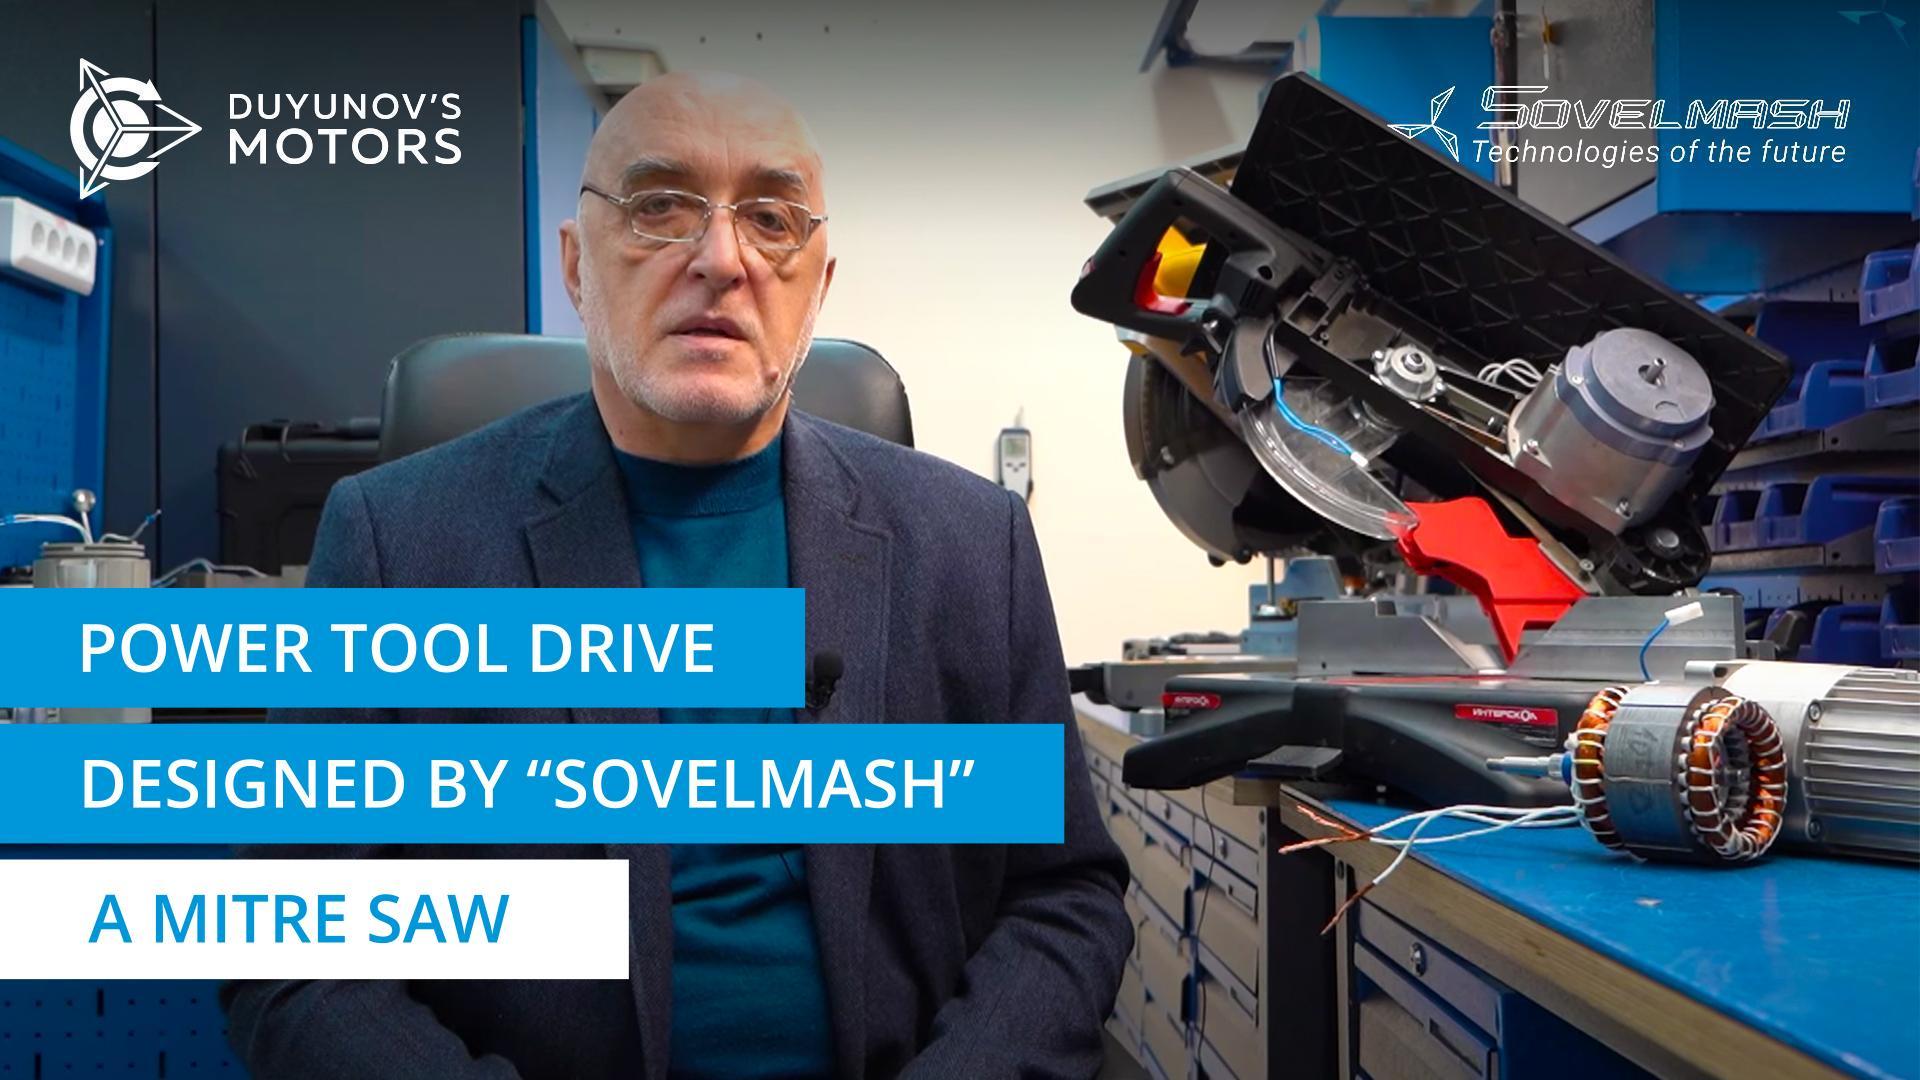 Power tool drive designed by "Sovelmash": a mitre saw